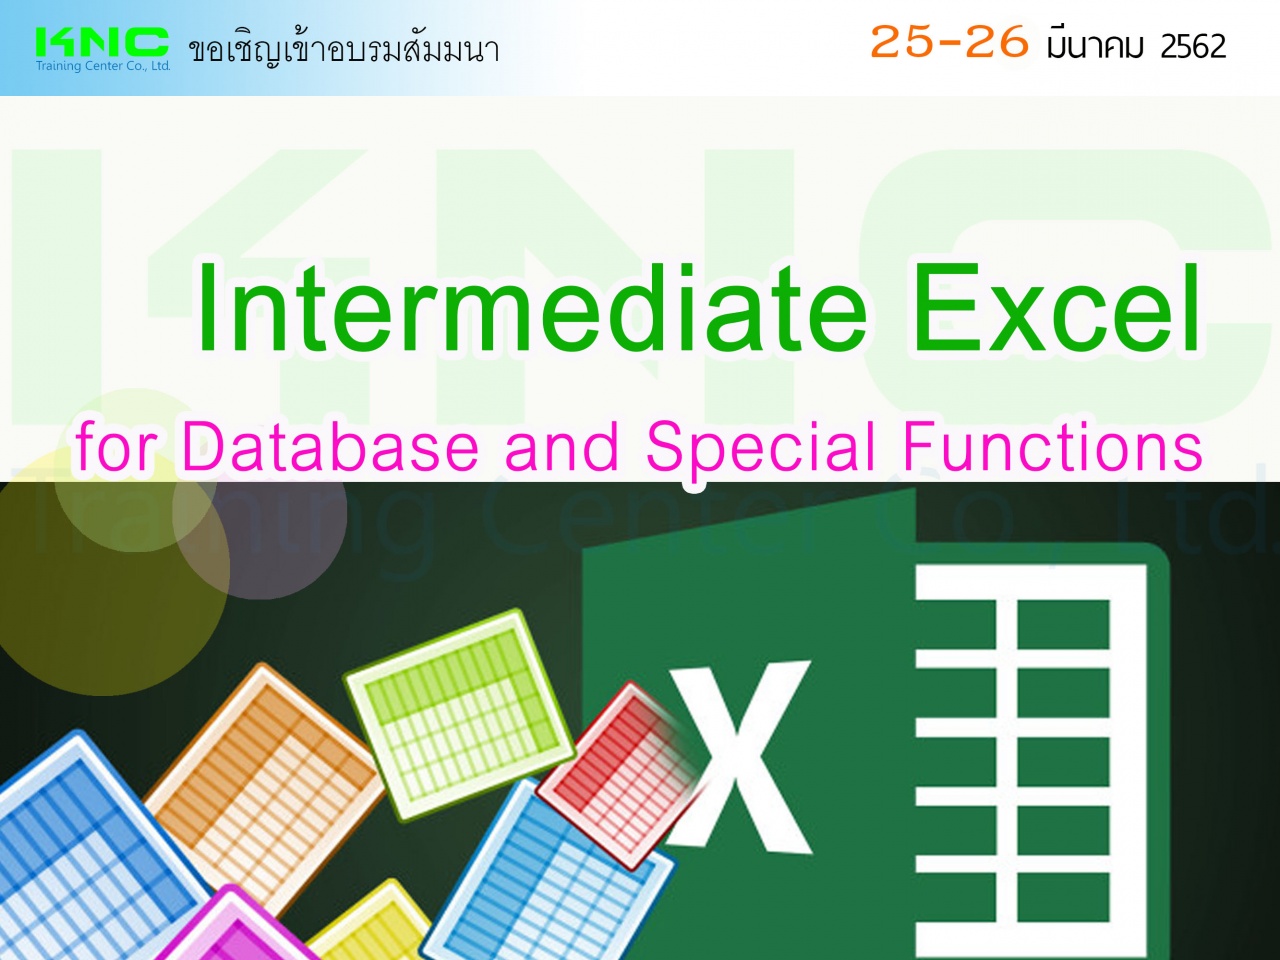 Intermediate Excel for Database and Special Functions